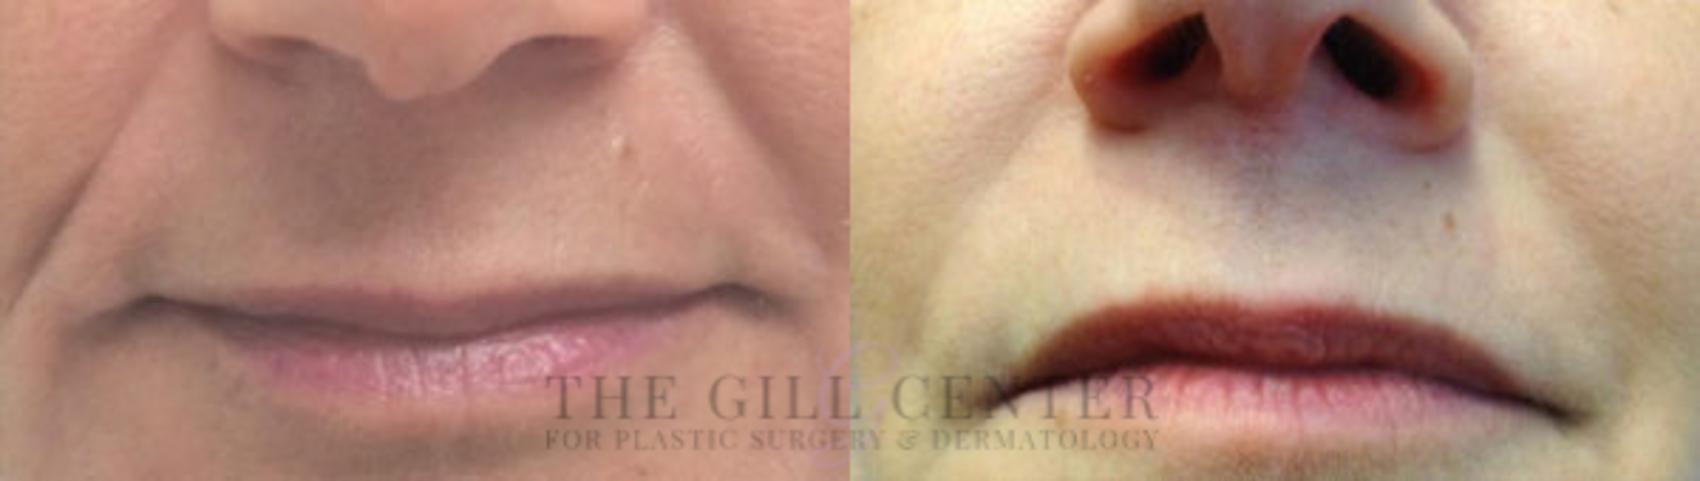 Dermal Fillers Case 354 Before & After Front | The Woodlands, TX | The Gill Center for Plastic Surgery and Dermatology